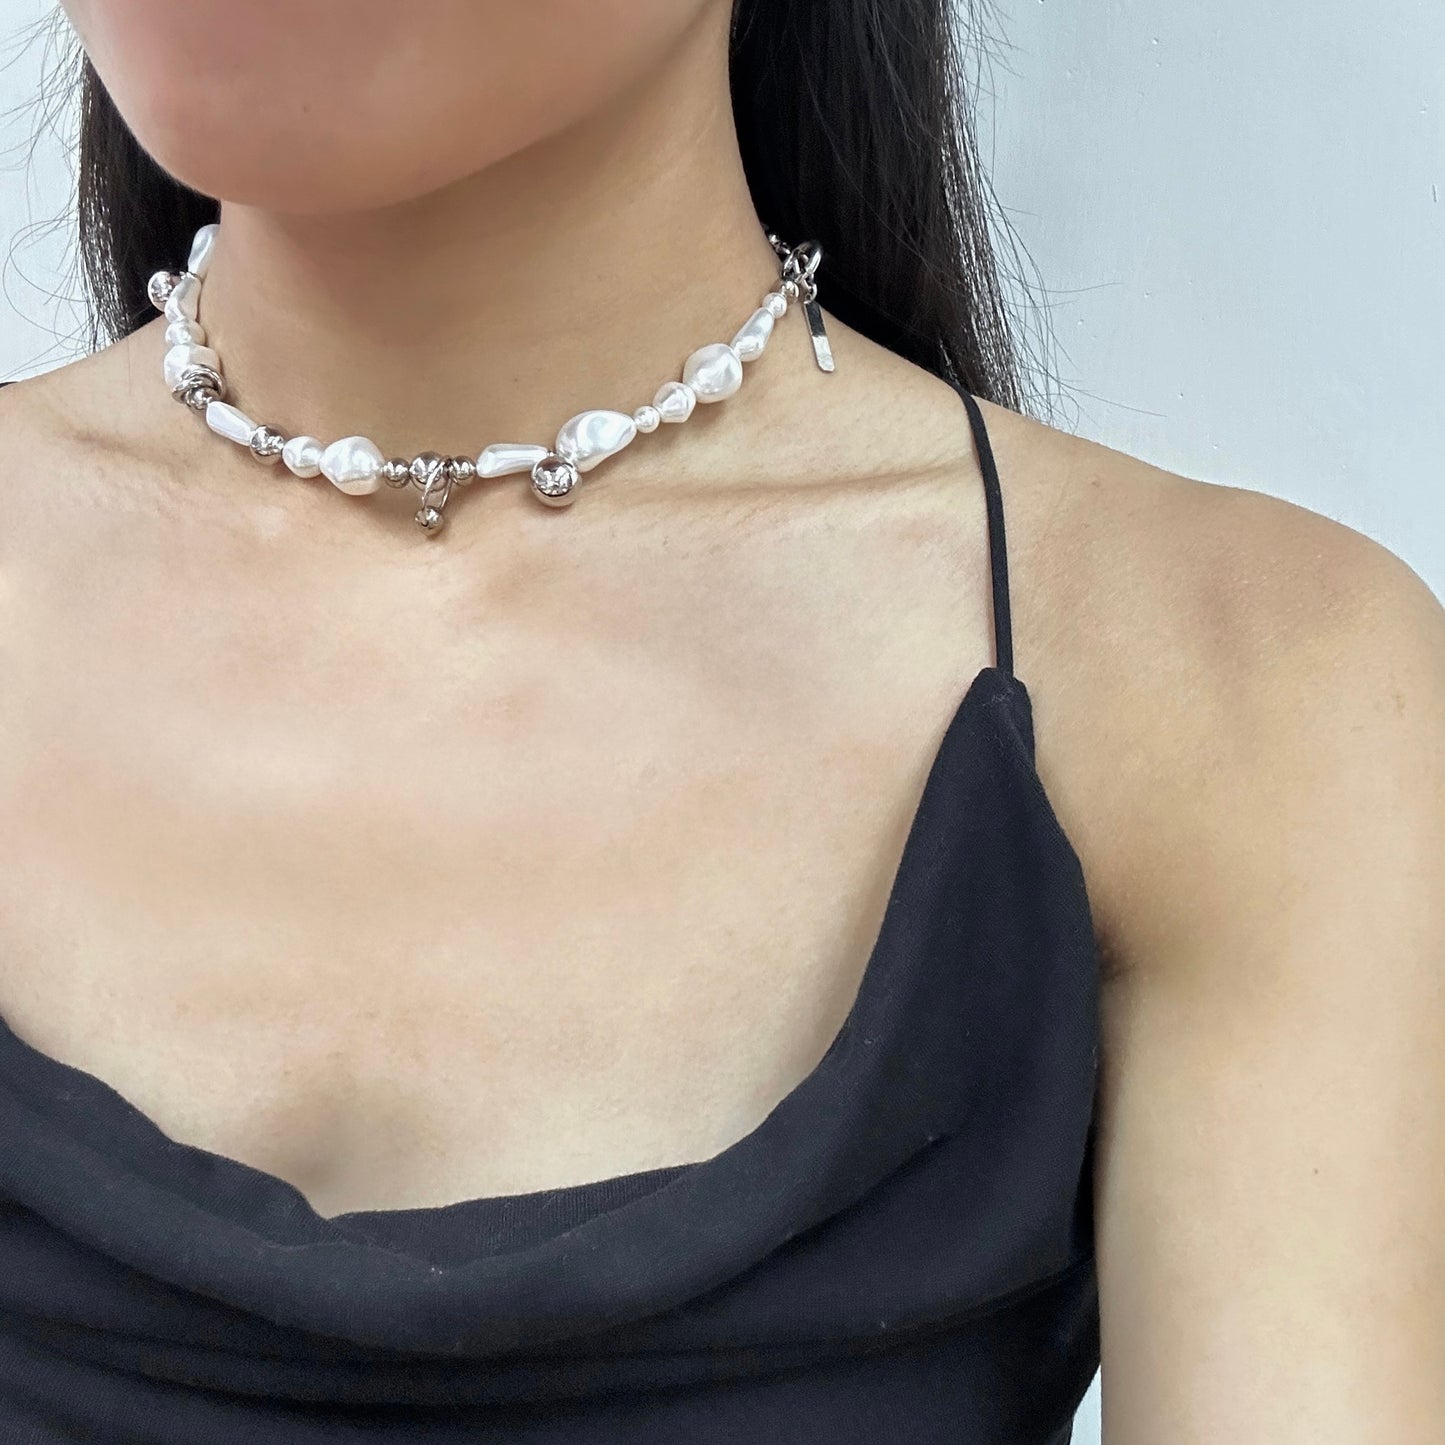 Justine Clenquet 法國飾物 - Charly Choker